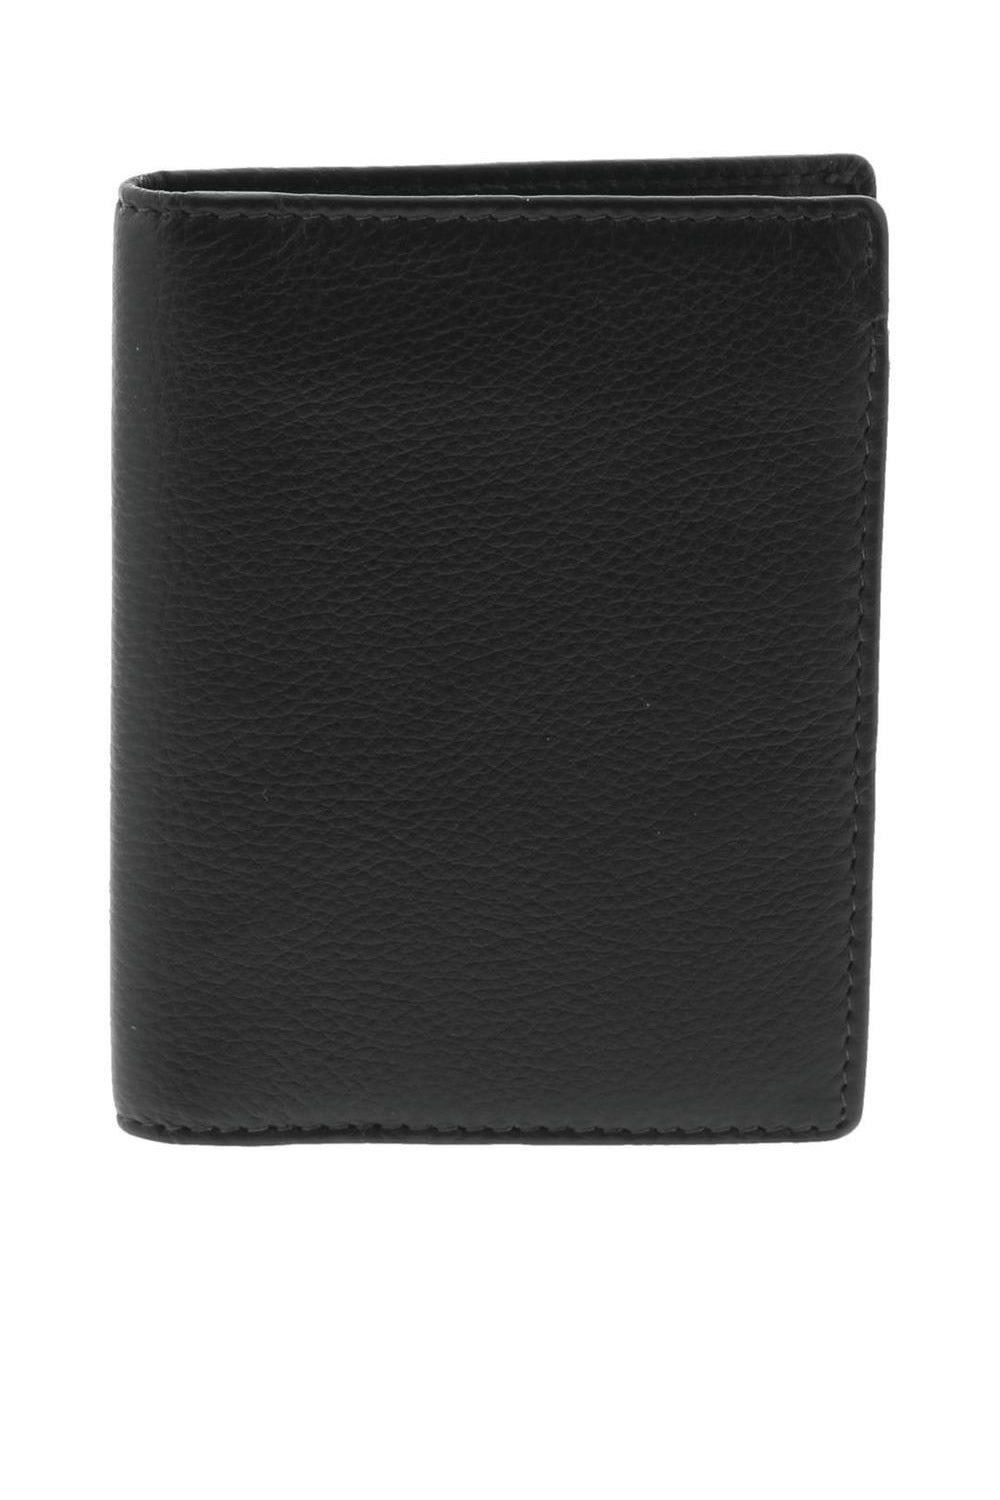 Cobb & Co Isaac RFID Trifold Leather Wallet